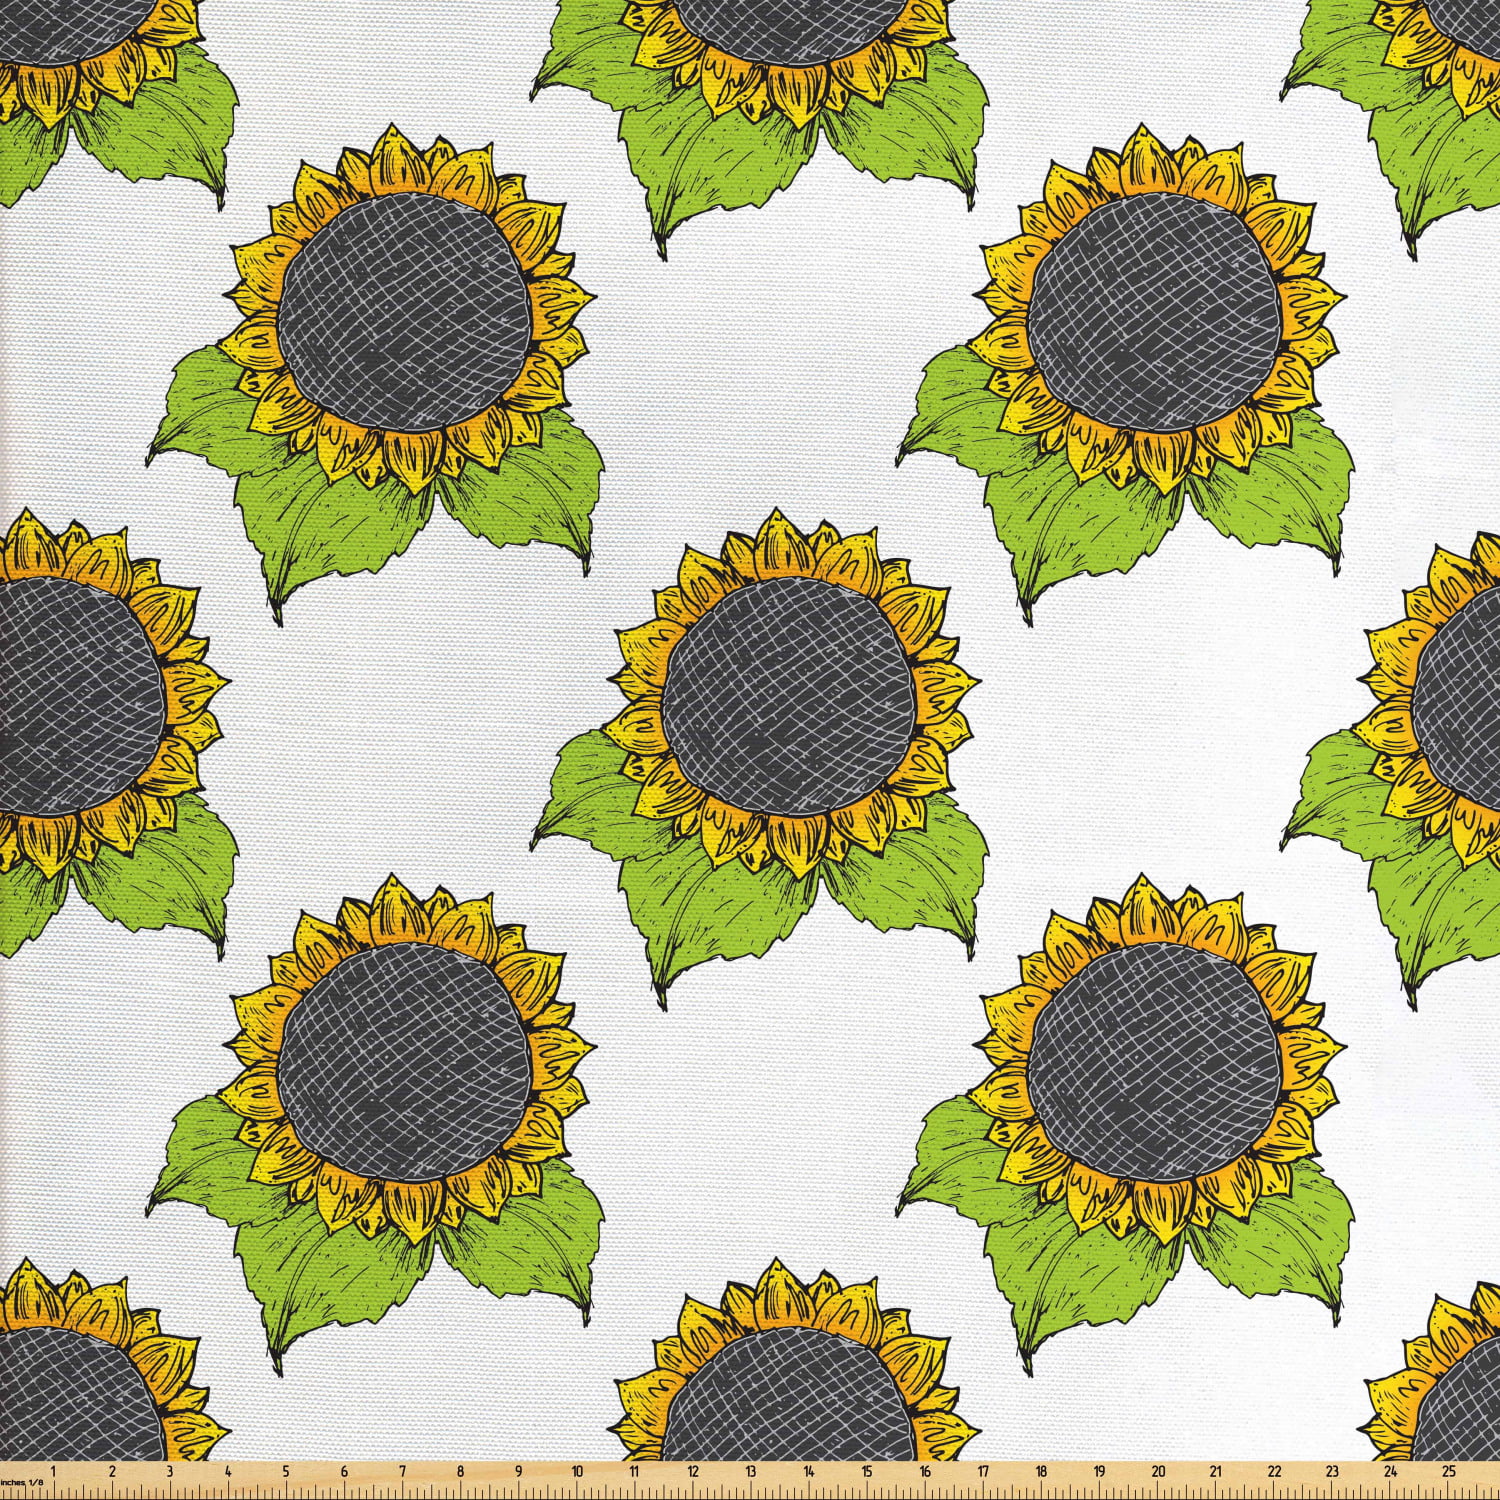 Bright Color Sunflower Pattern 100/% Cotton Fabric by Half Yard for Sewing Crafts Home Decor